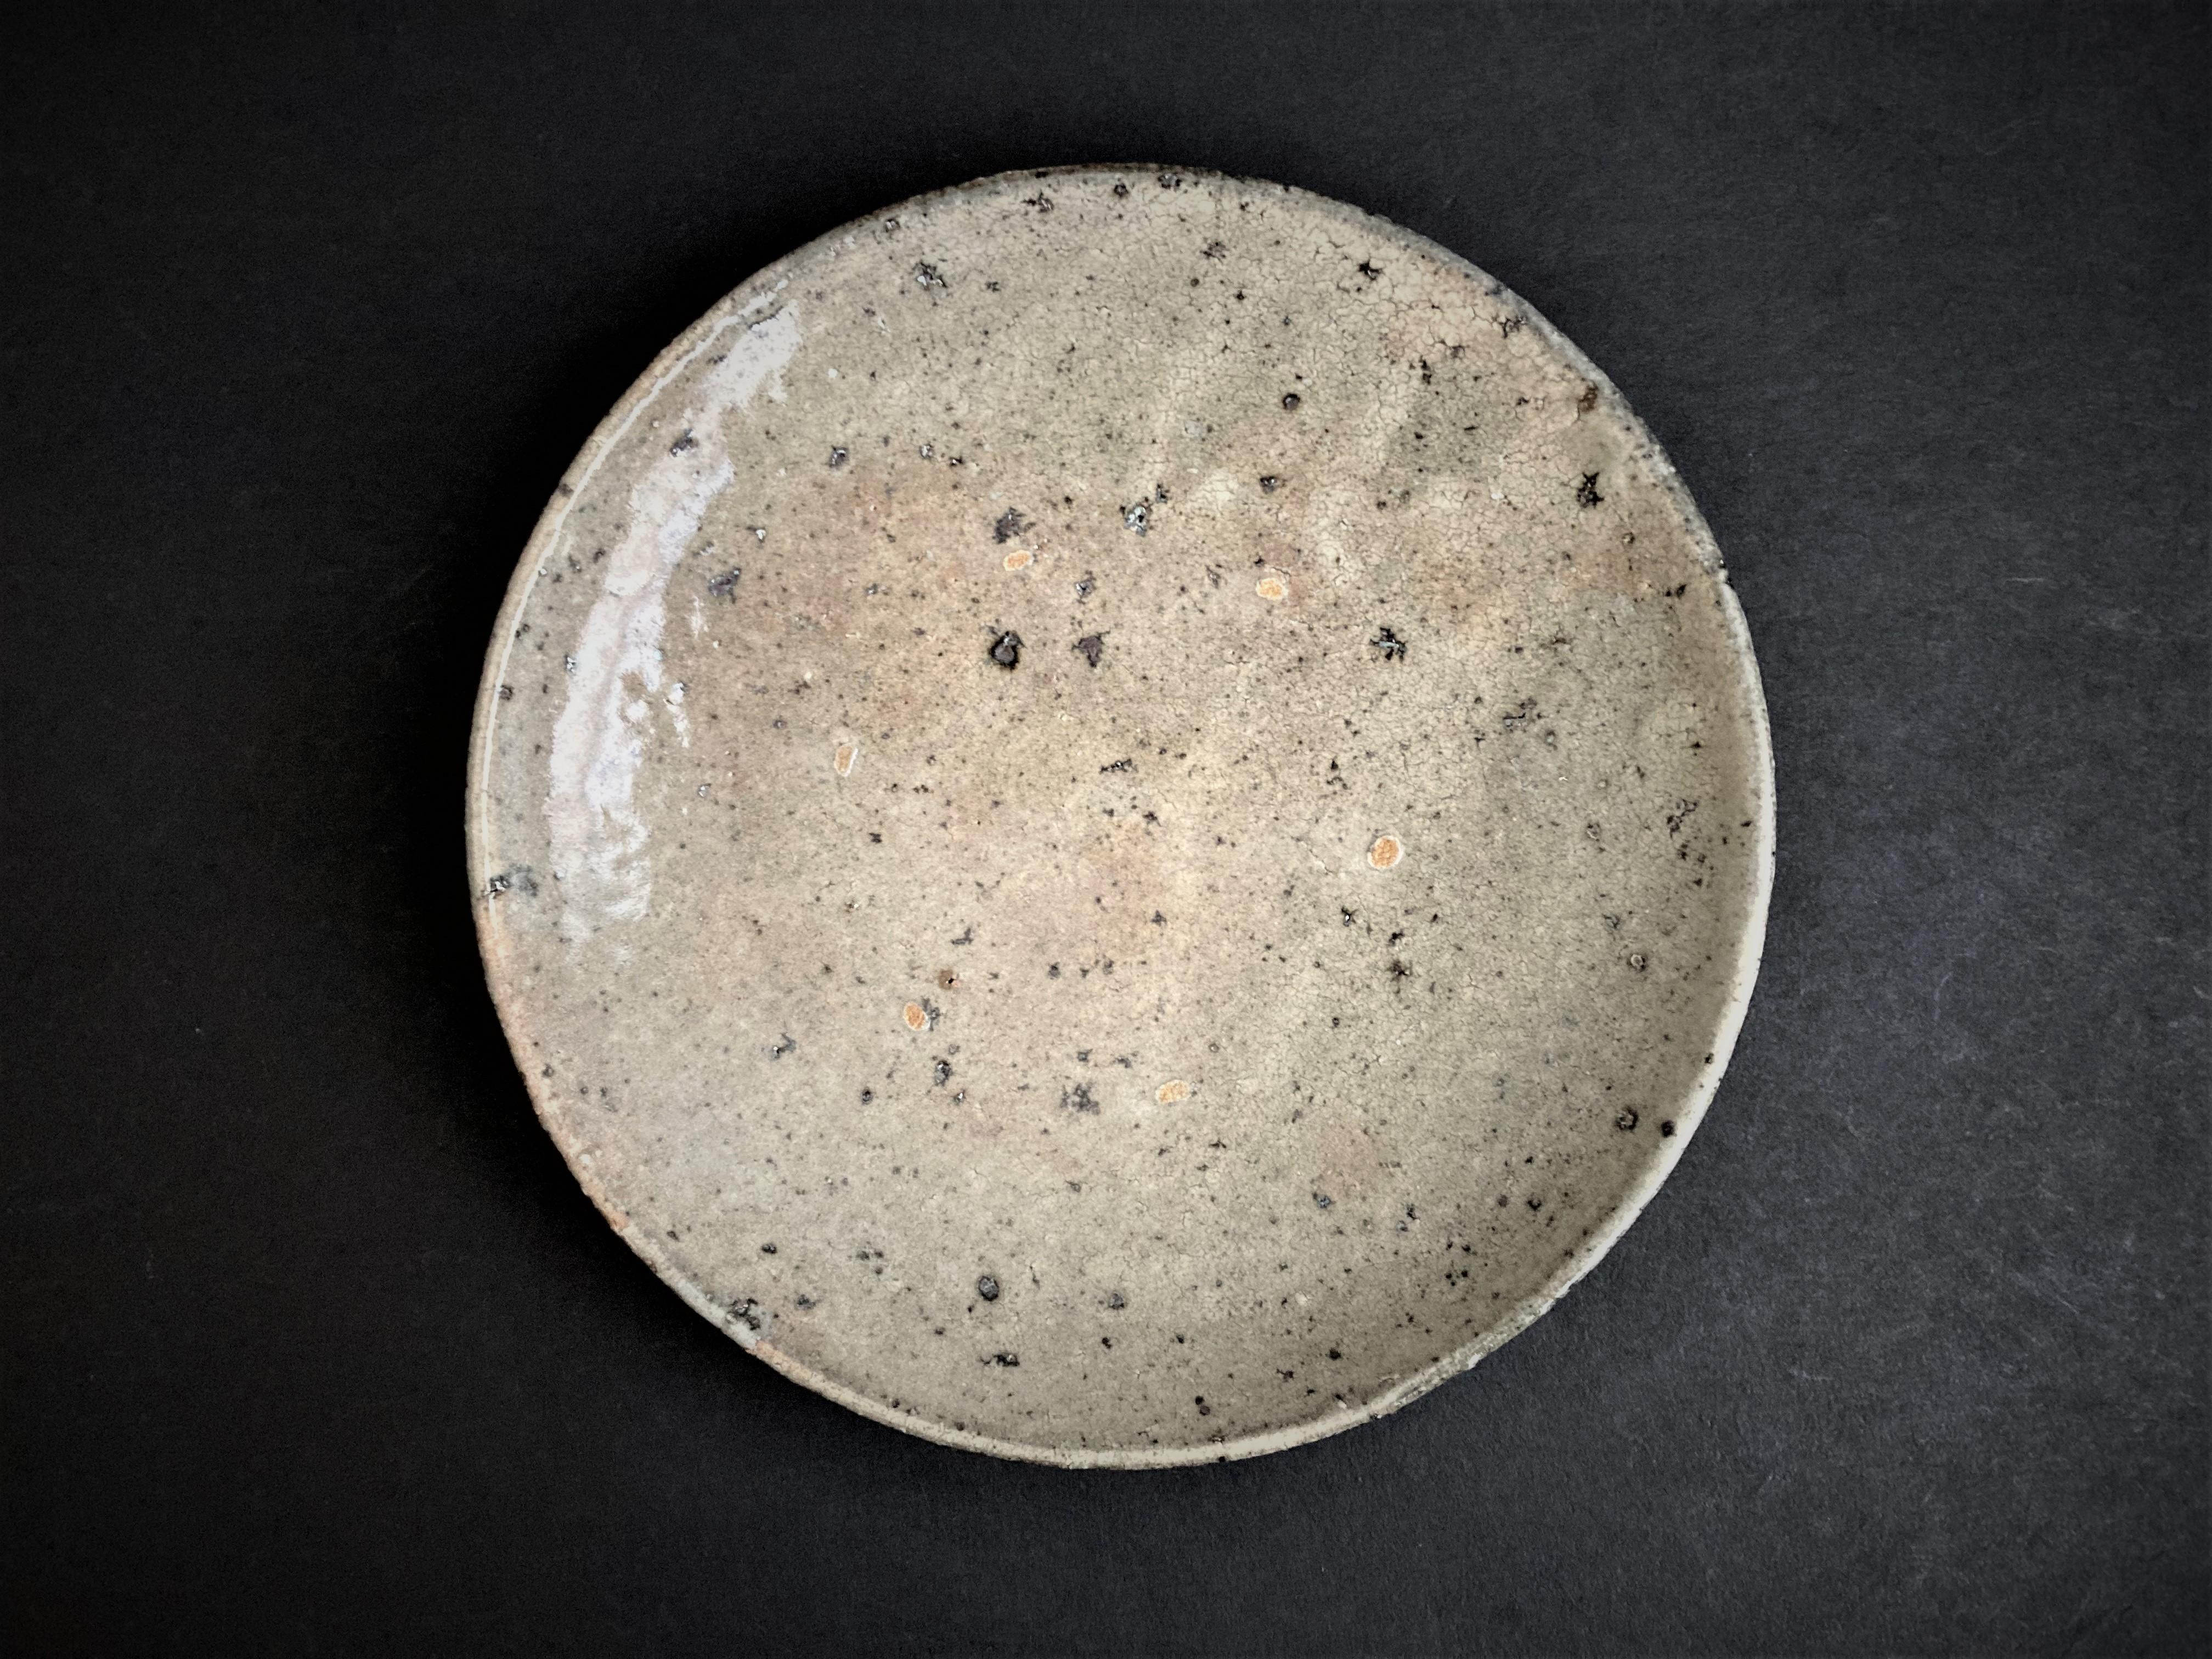 Set of 2 White Plate by Toru Hatta
Limited Edition of 2
Dimensions: Diameter 26 x Height 4.5 cm 
Material: Handmade Ceramic 

Lead time may vary. Please contact us.


Toru Hatta was both in Kanazawa in 1977. His love of antiques and old wares lends